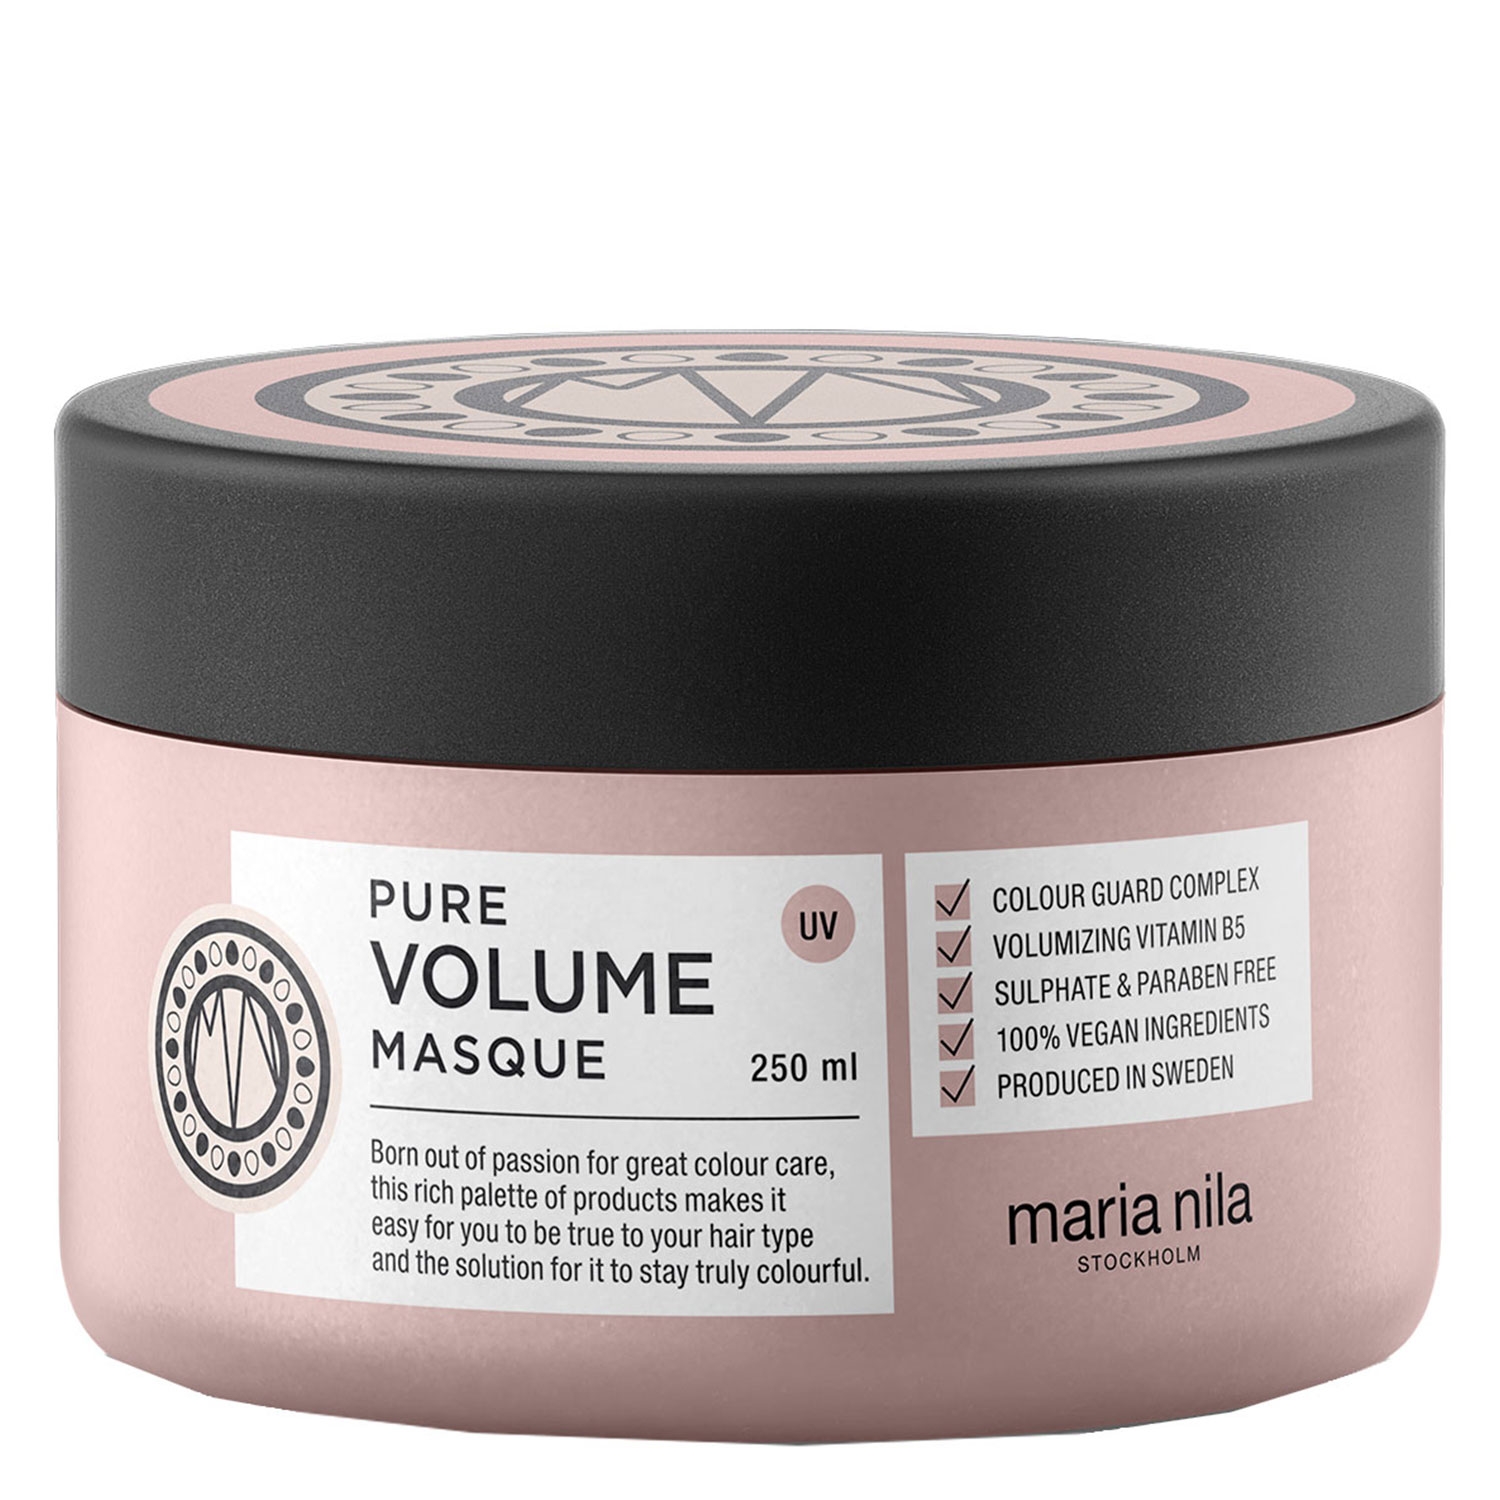 Product image from Care & Style - Pure Volume Masque